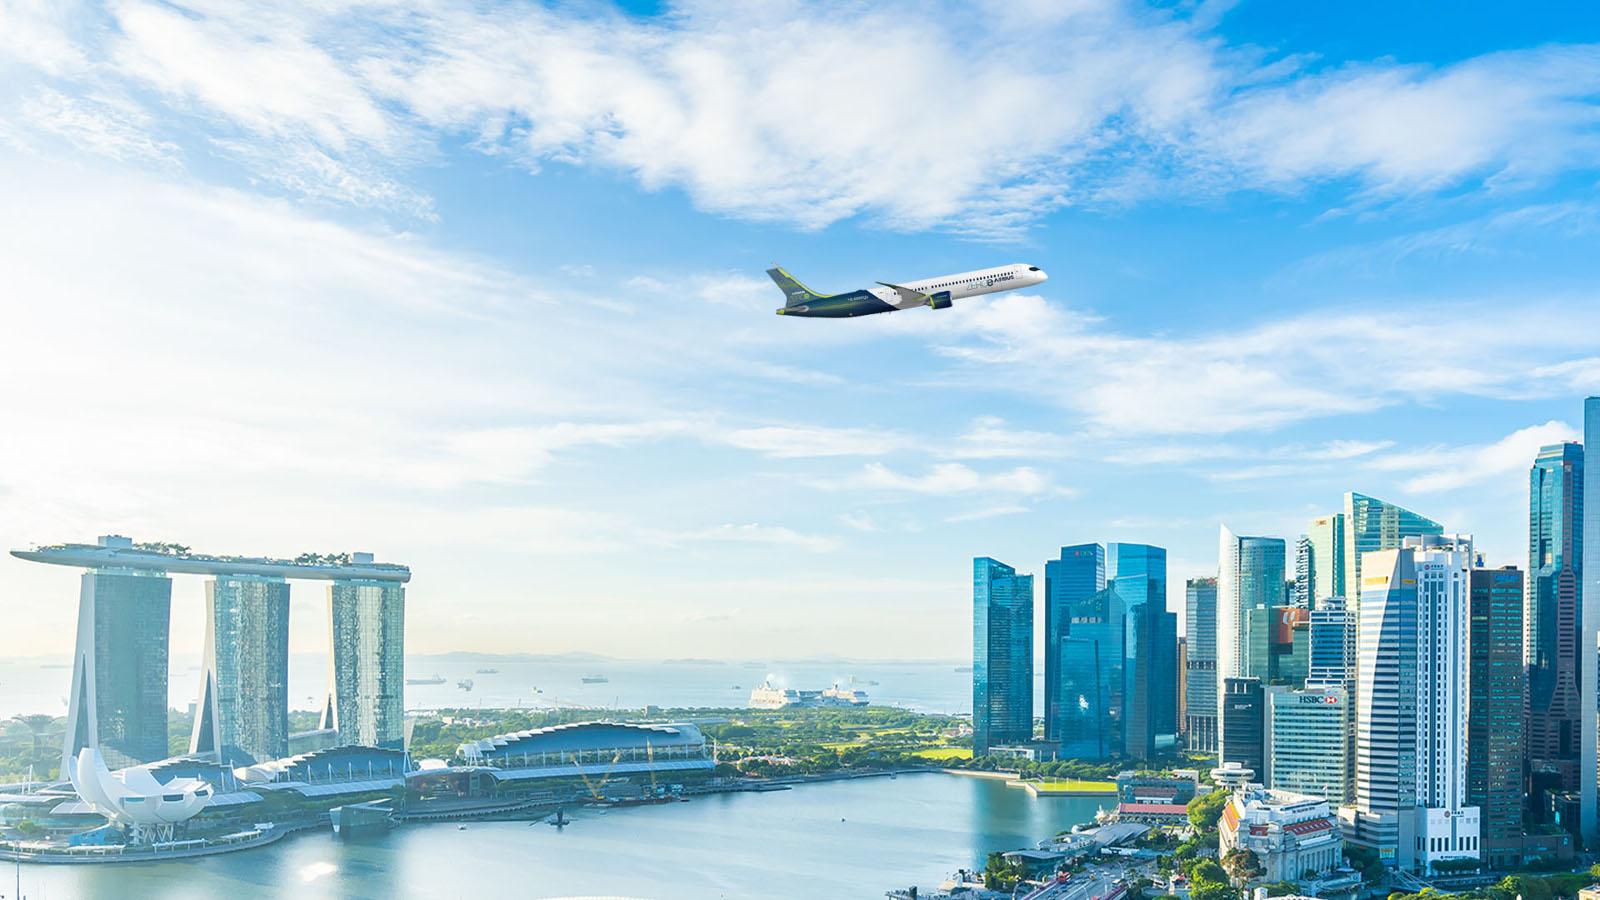 Hydrogen’s Role in Singapore’s Aviation Decarbonization